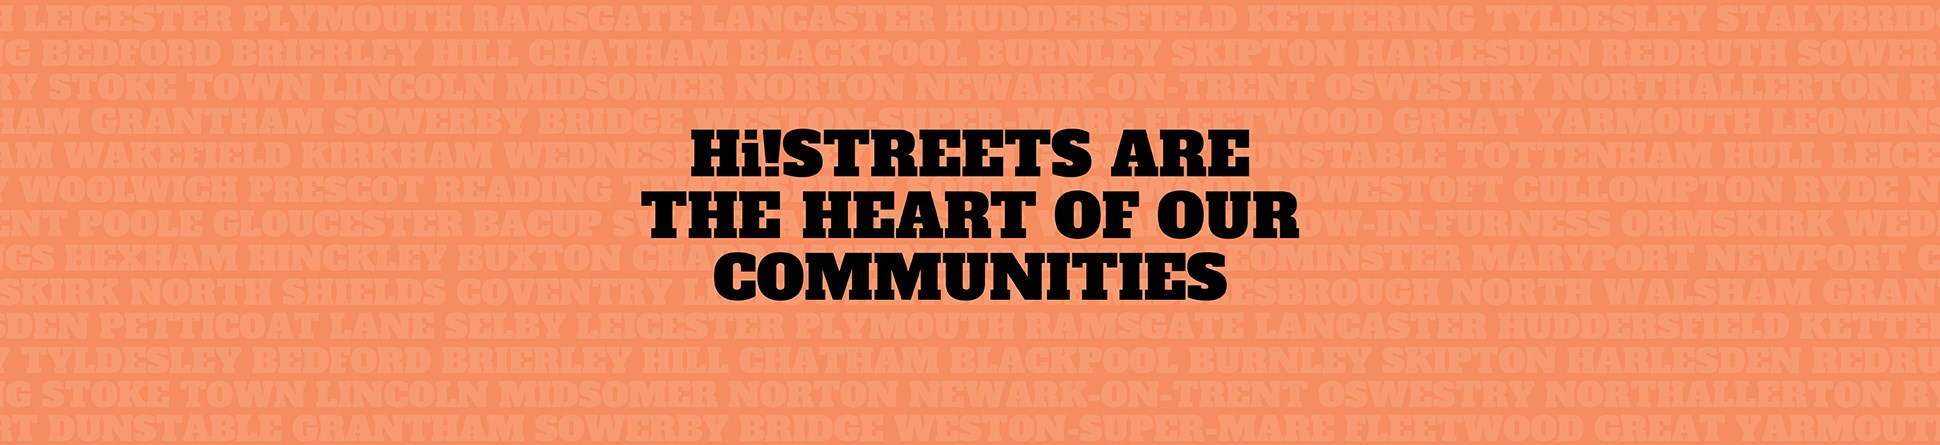 High Street Heritage Action Zone branded image with background text that lists all of the names of the 66 HSHAZs and foreground text in black that reads: HI!STREETS ARE THE HEART OF OUR COMMUNITIES